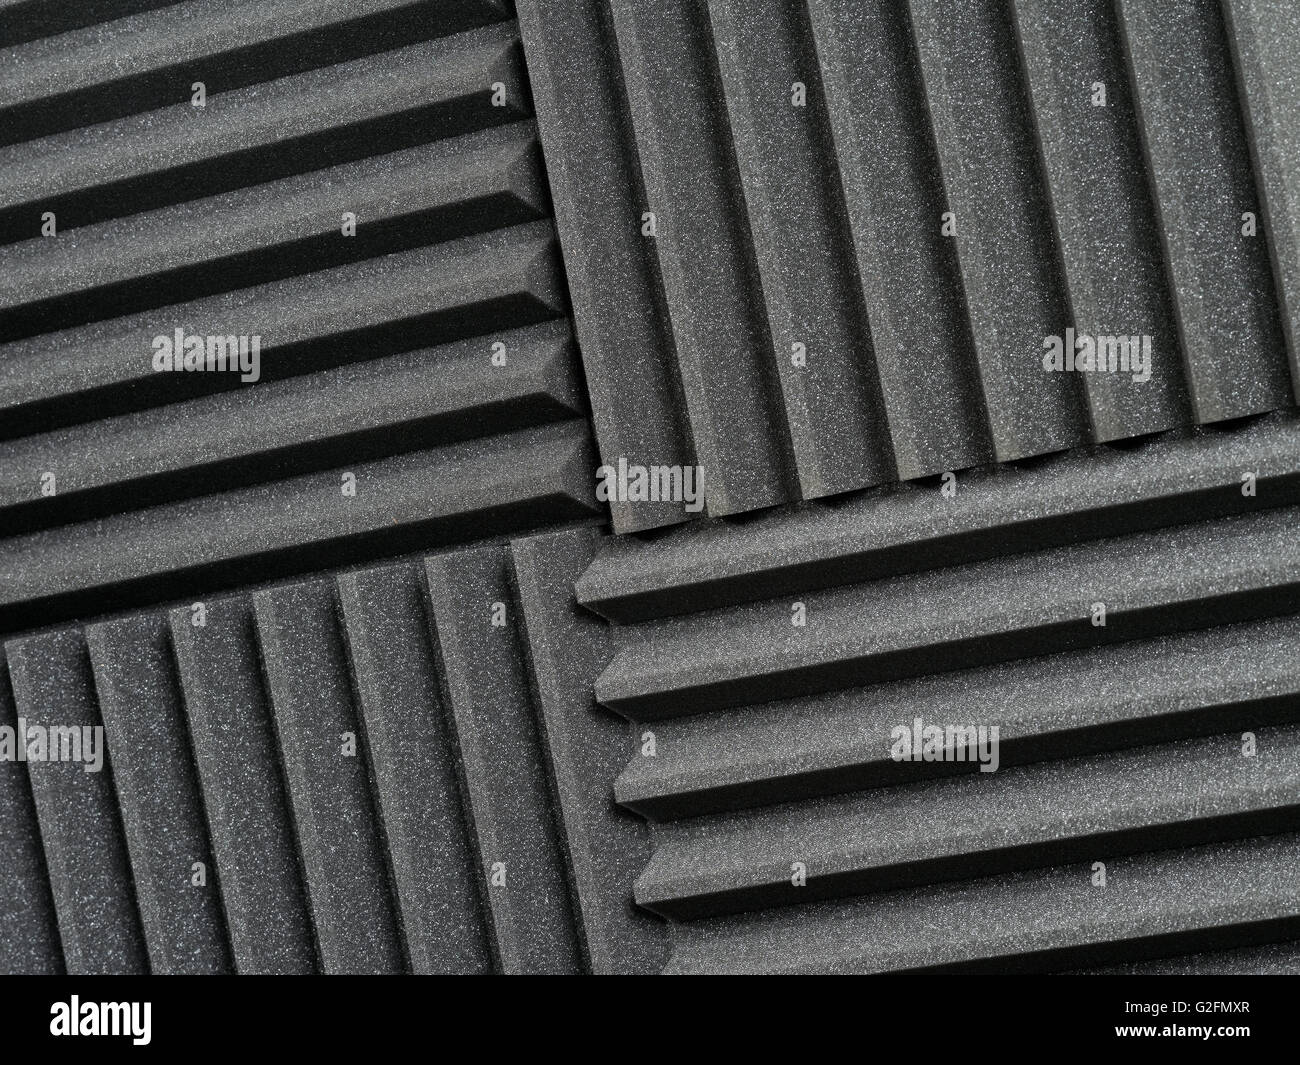 Background photo of recording studio sound dampening acoustical foam or tiles. Stock Photo